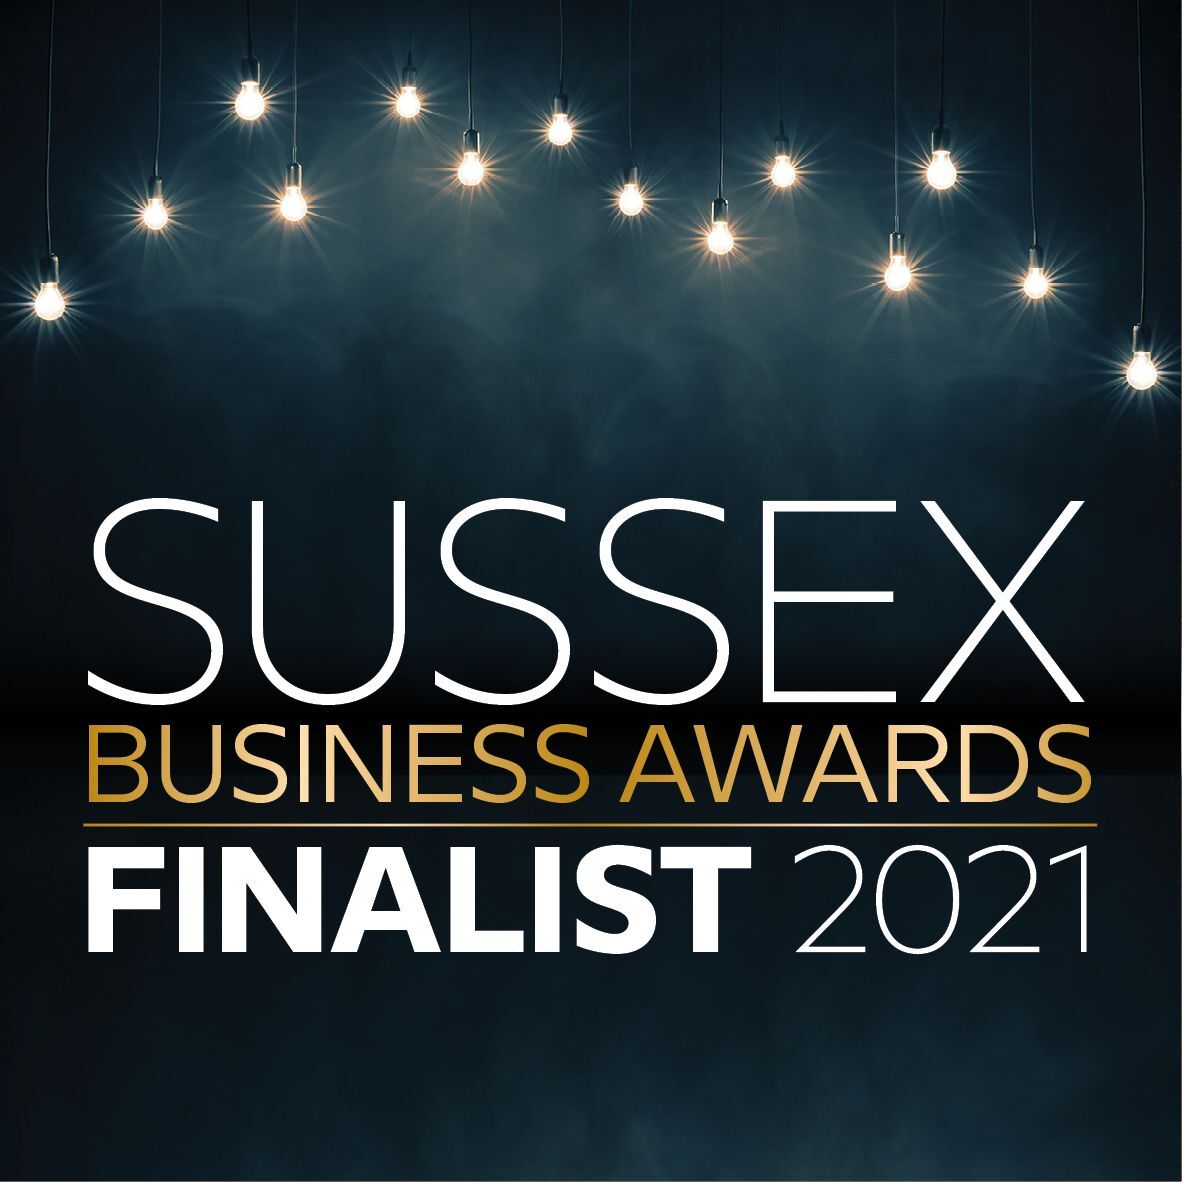 We're very excited for the Sussex Business Awards tomorrow evening @SussexBizAwards!! We're up for SME Business of the Year - alongside some other amazing local business. 🥳🎉🎉🍾🍾🥳